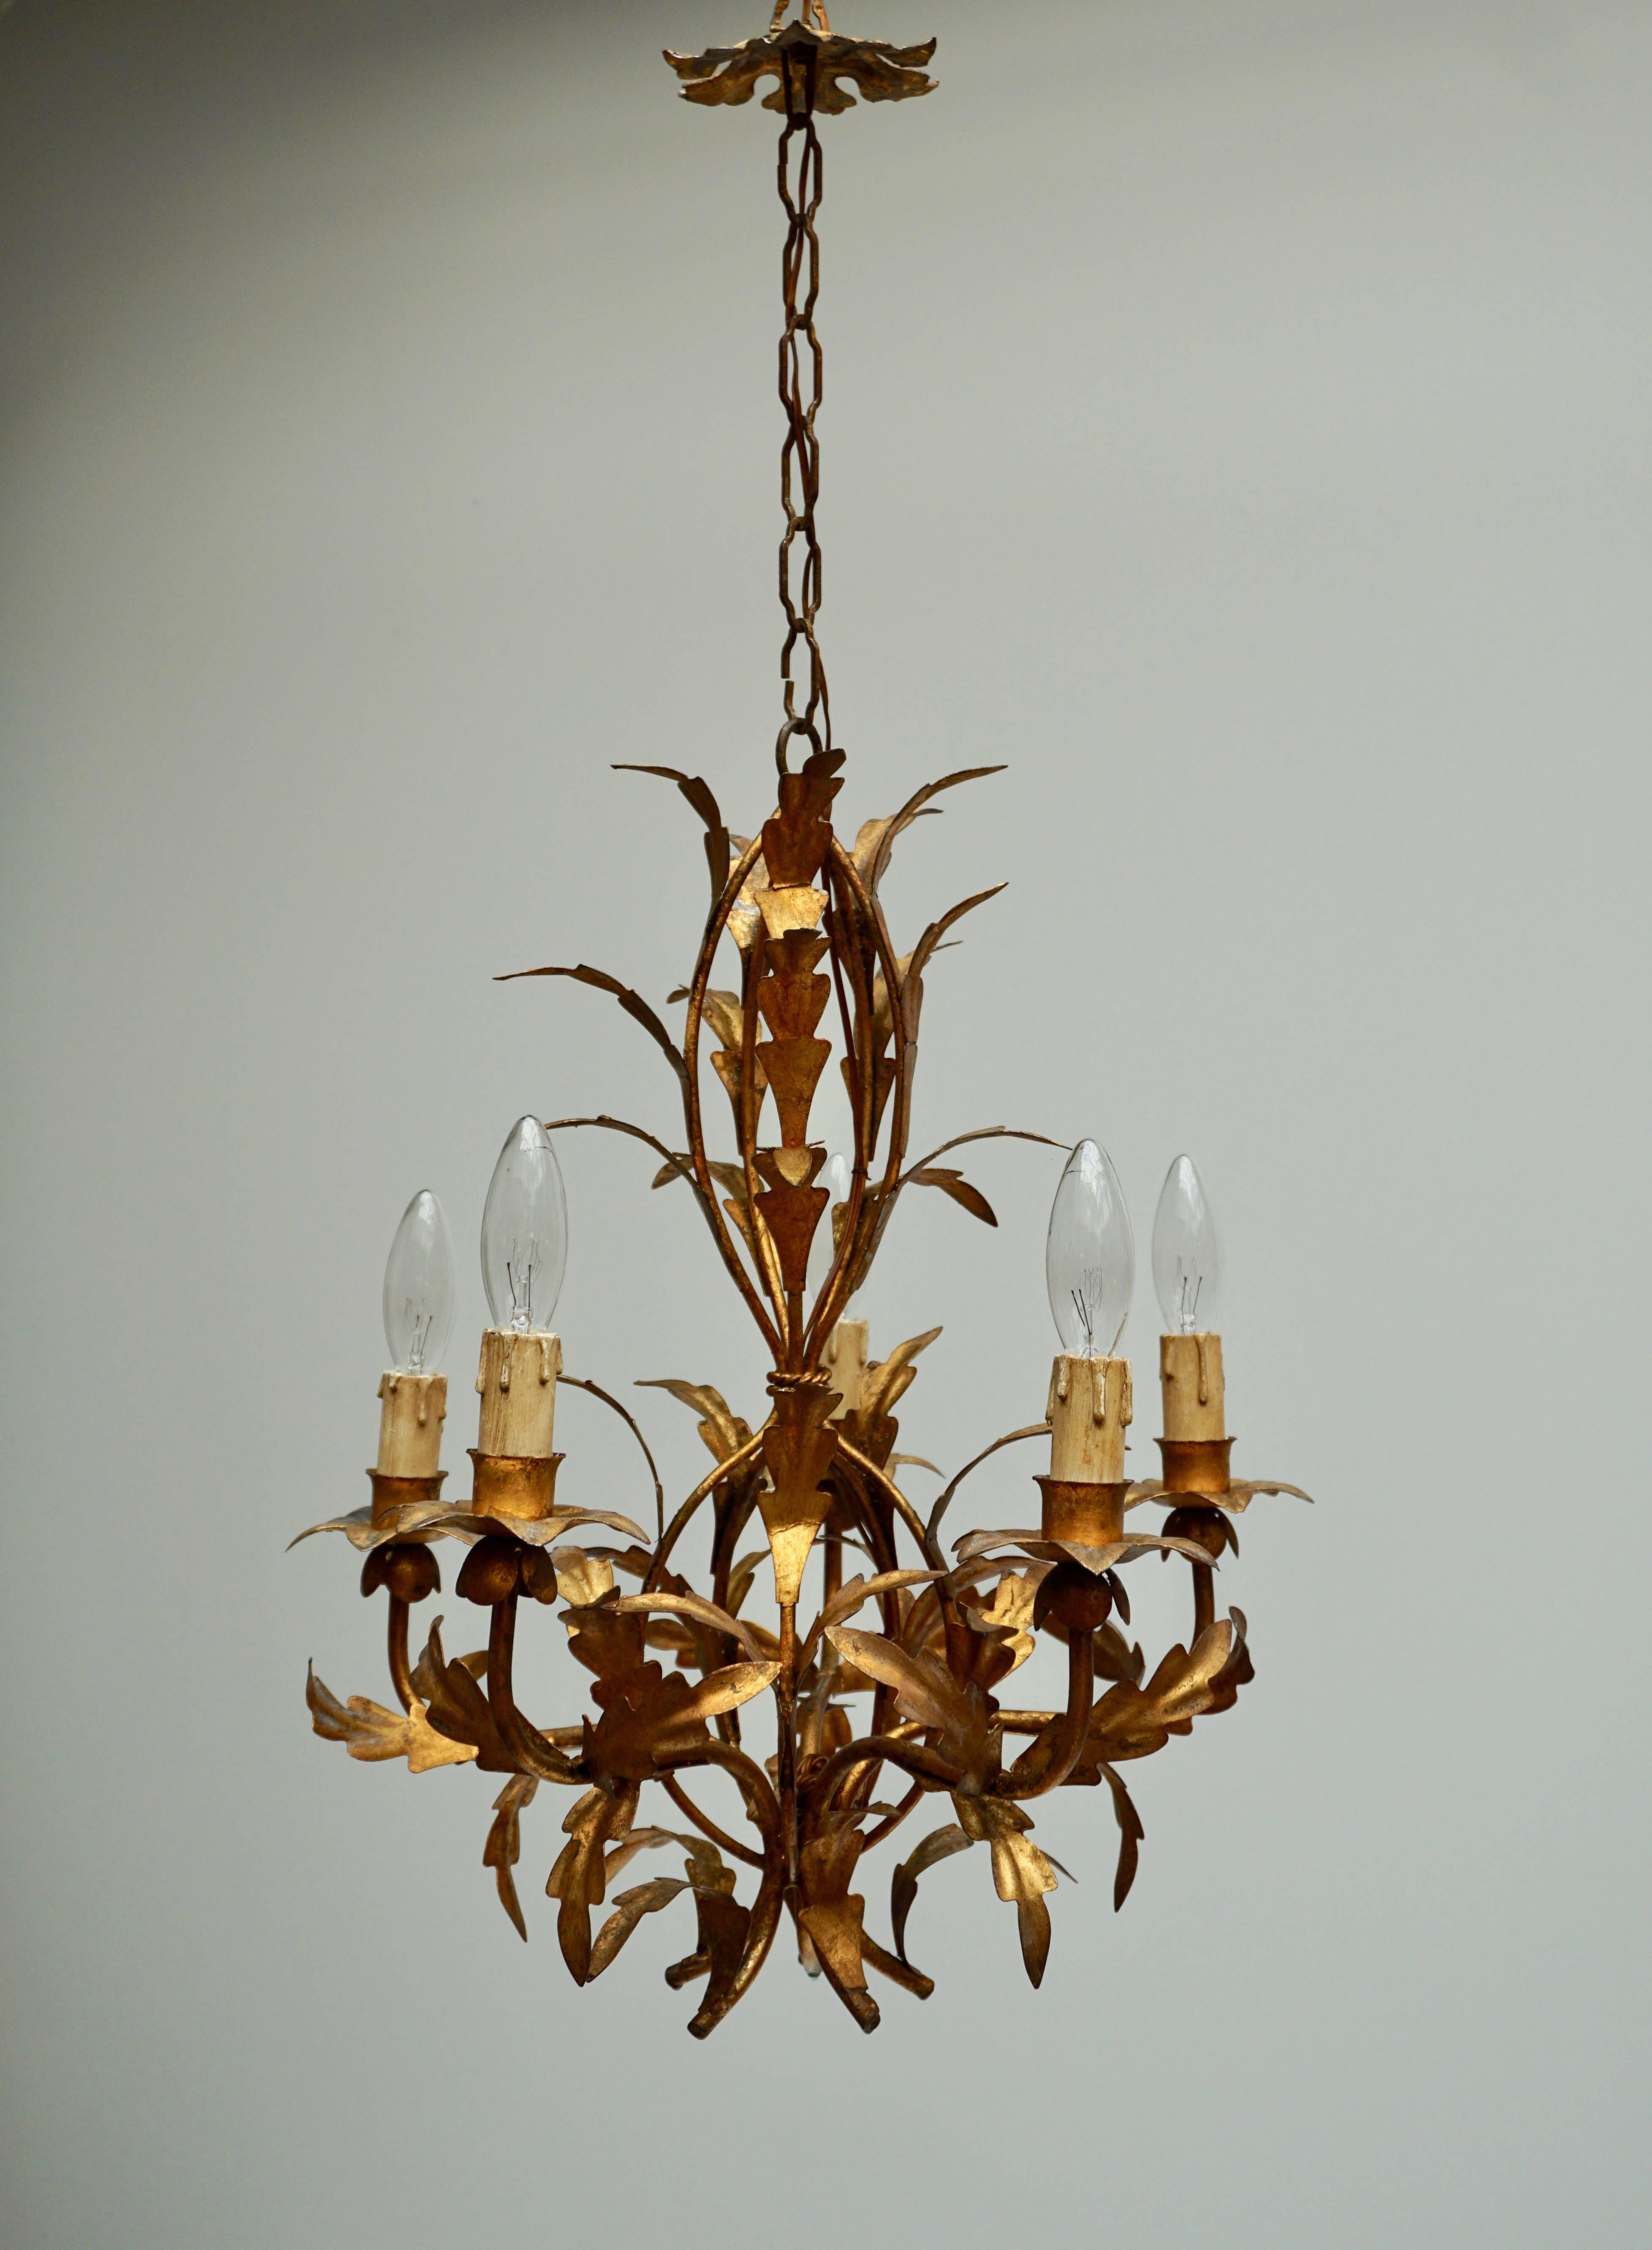 Highly decorative handcrafted gold leaf gilt iron five light chandelier. This five branches tole chandelier is hand-painted and has gold leaf finish and a lovely vintage patina. Small leaves surrounding each branch make this piece gorgeous.
Total